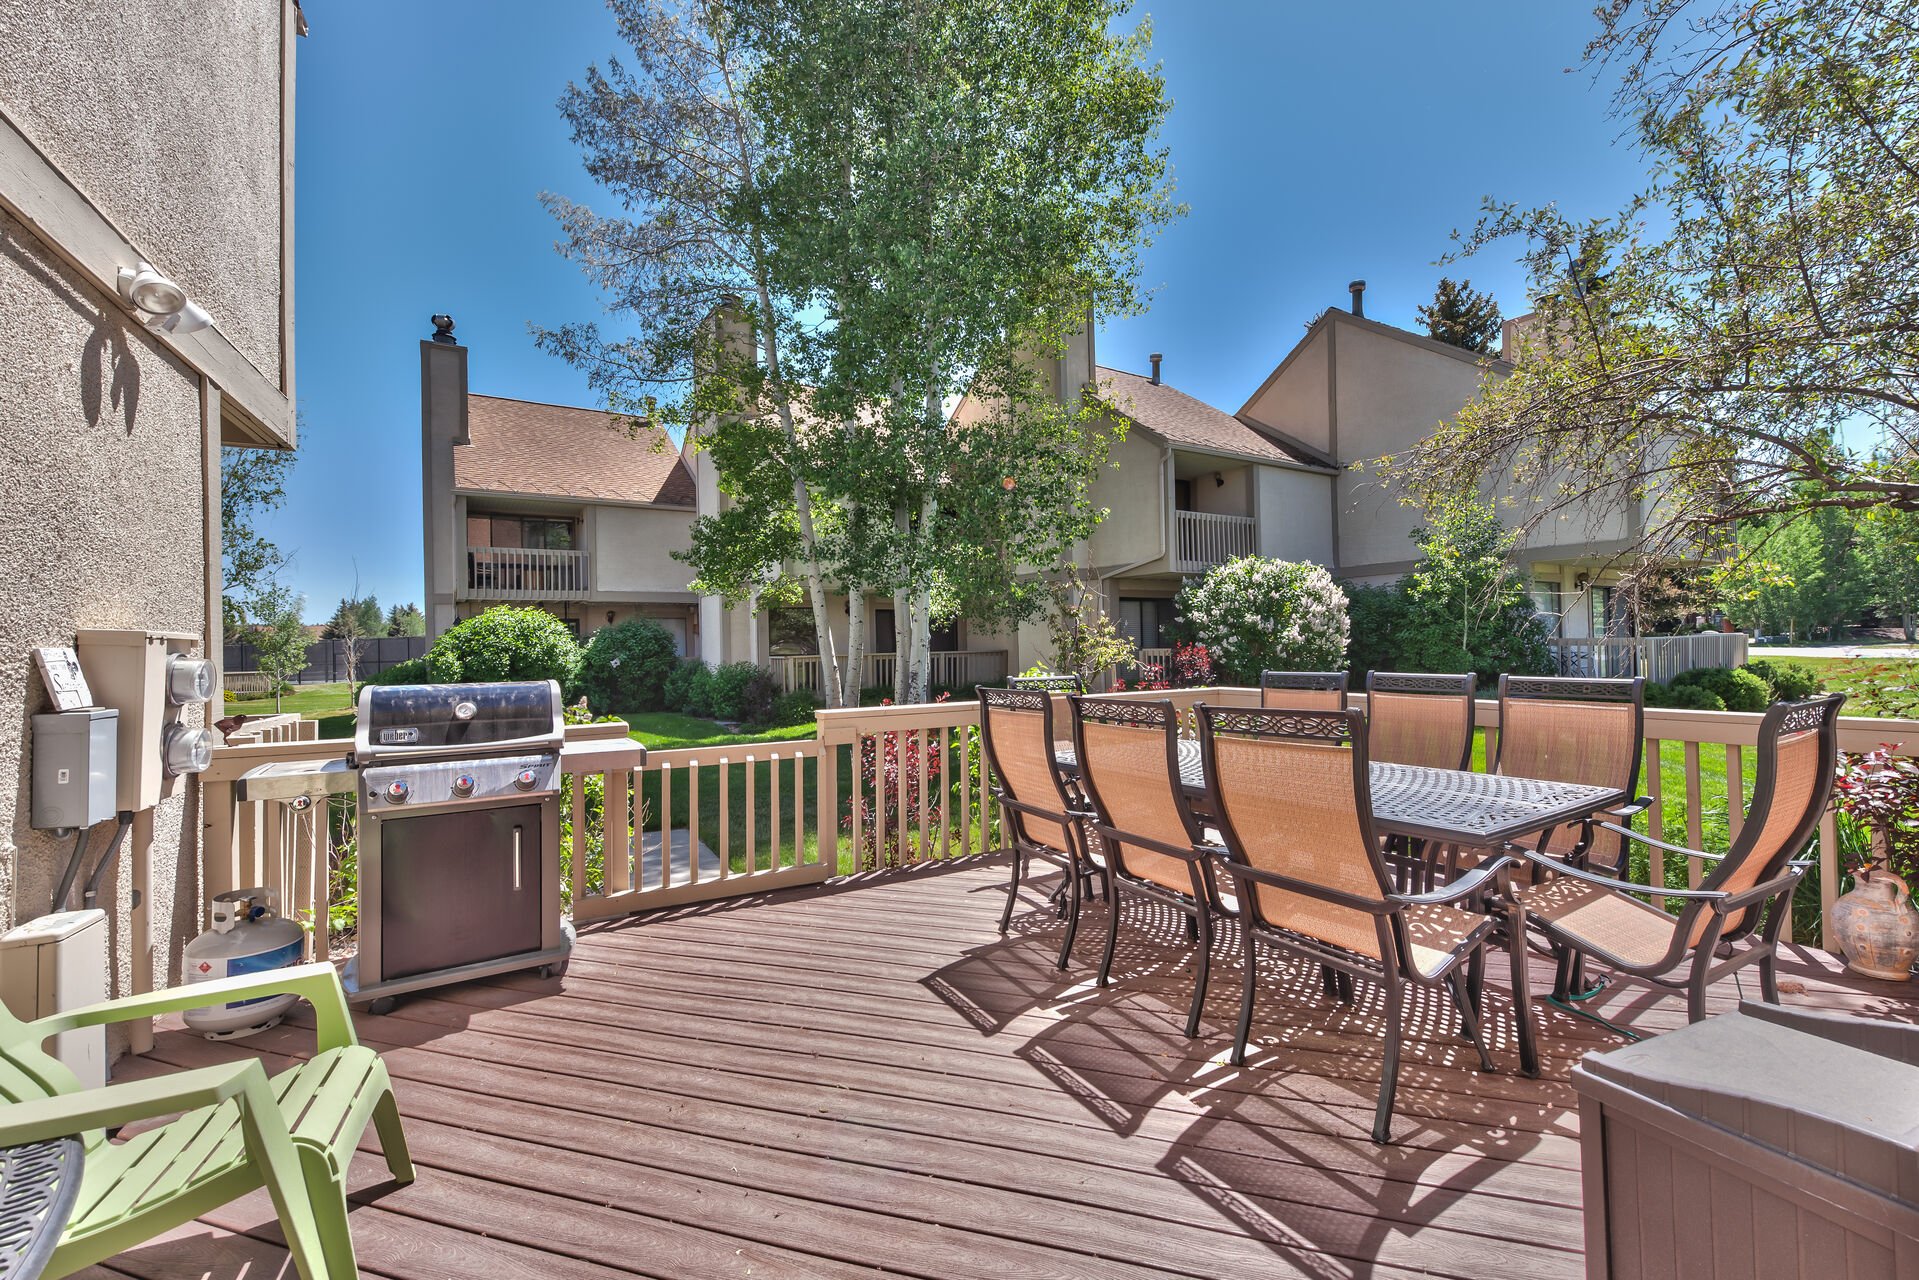 Front Deck with BBQ, and Outdoor Dining Area with Seating for 8.